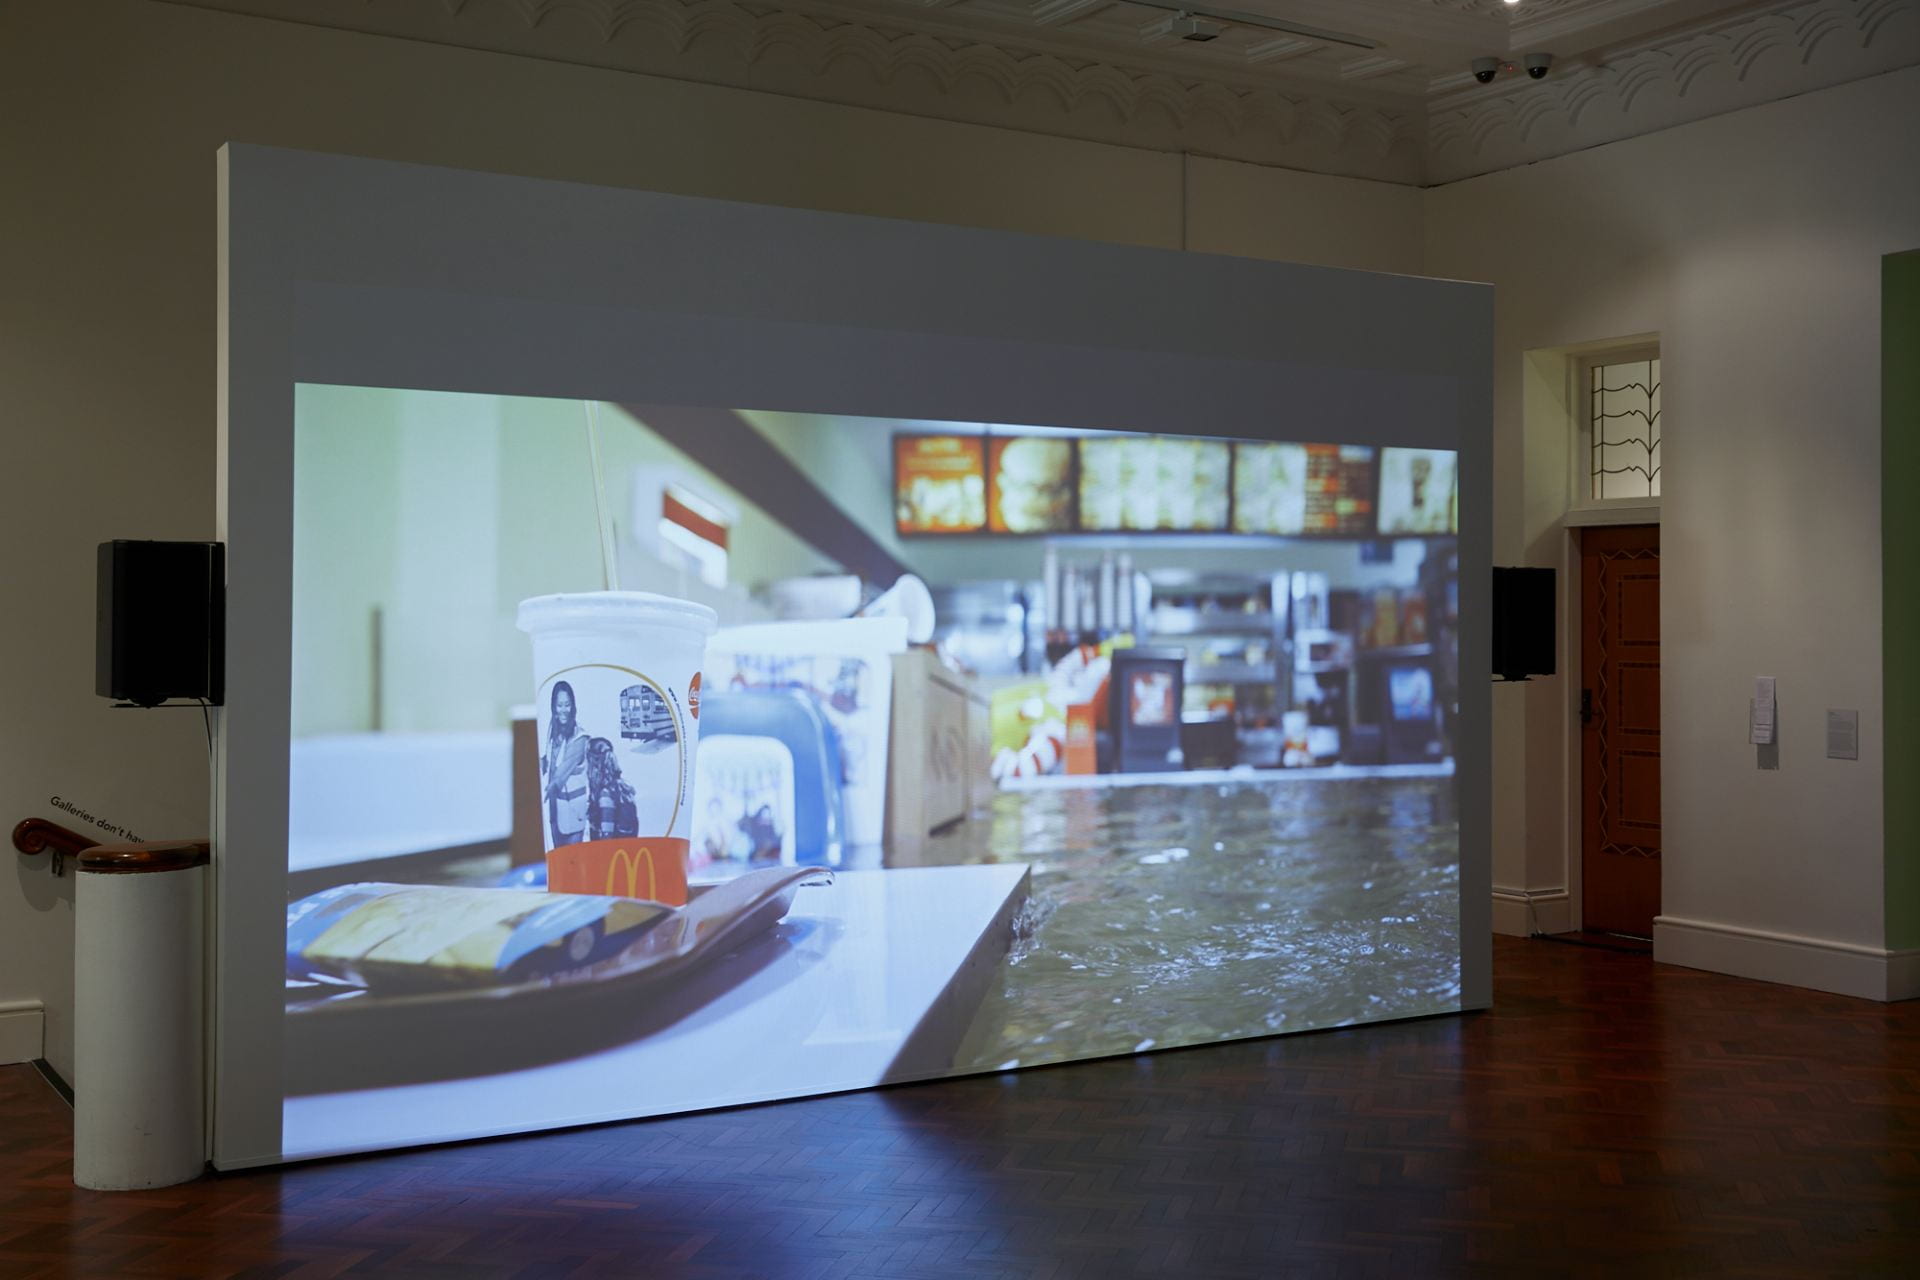 A projection screen shows a film. In the film, a McDonald's restaurant is being slowly filled with water. The water is at counter height.